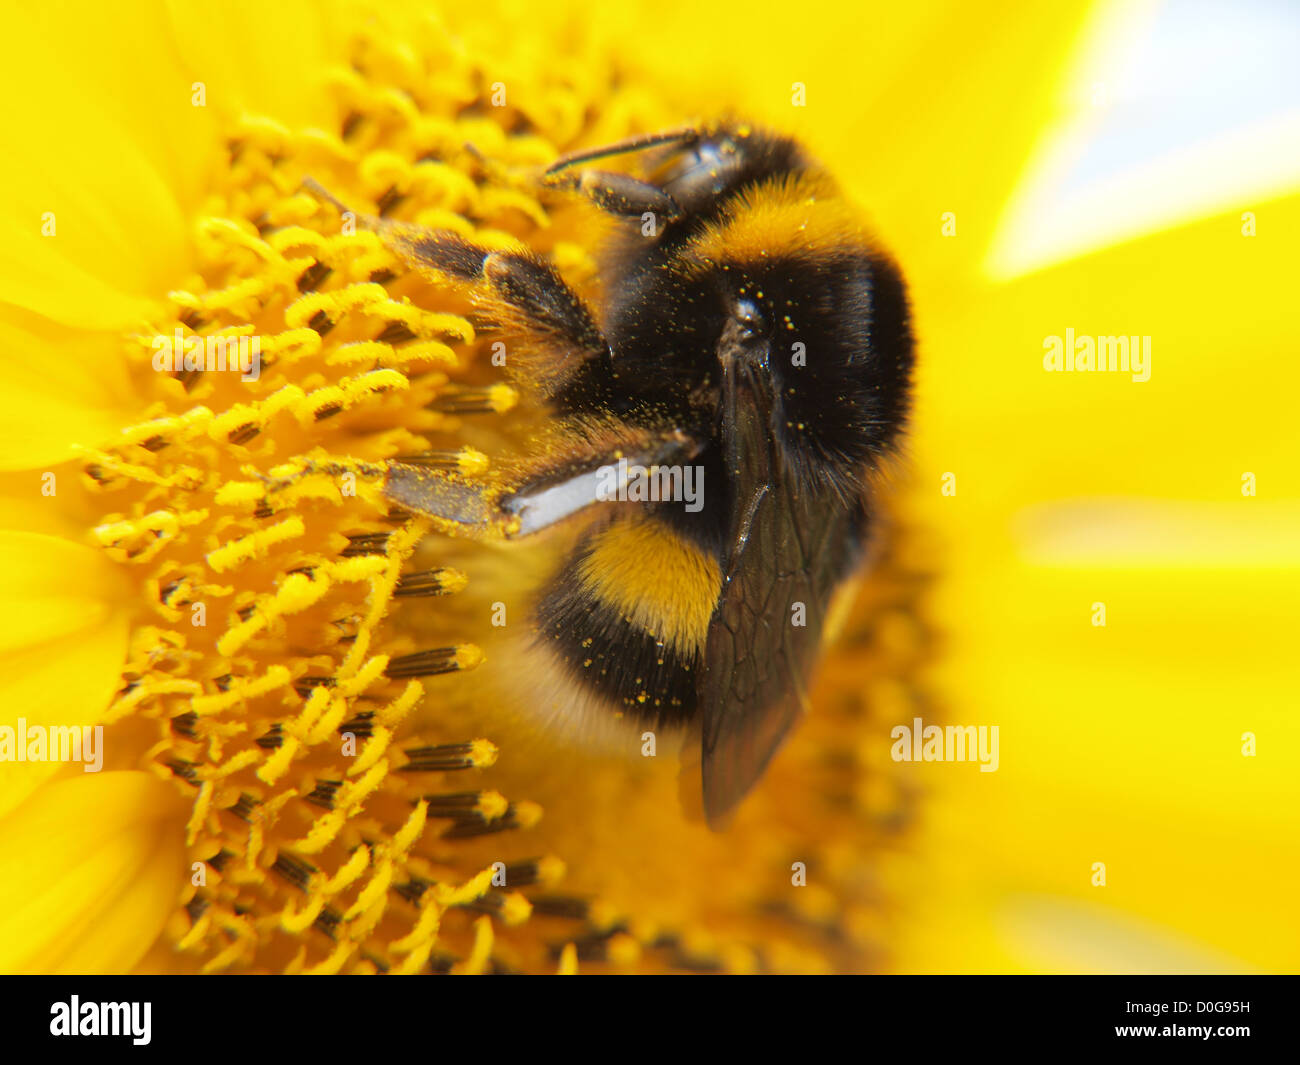 a bumble bee on a bright yellow sunflower full of food Stock Photo